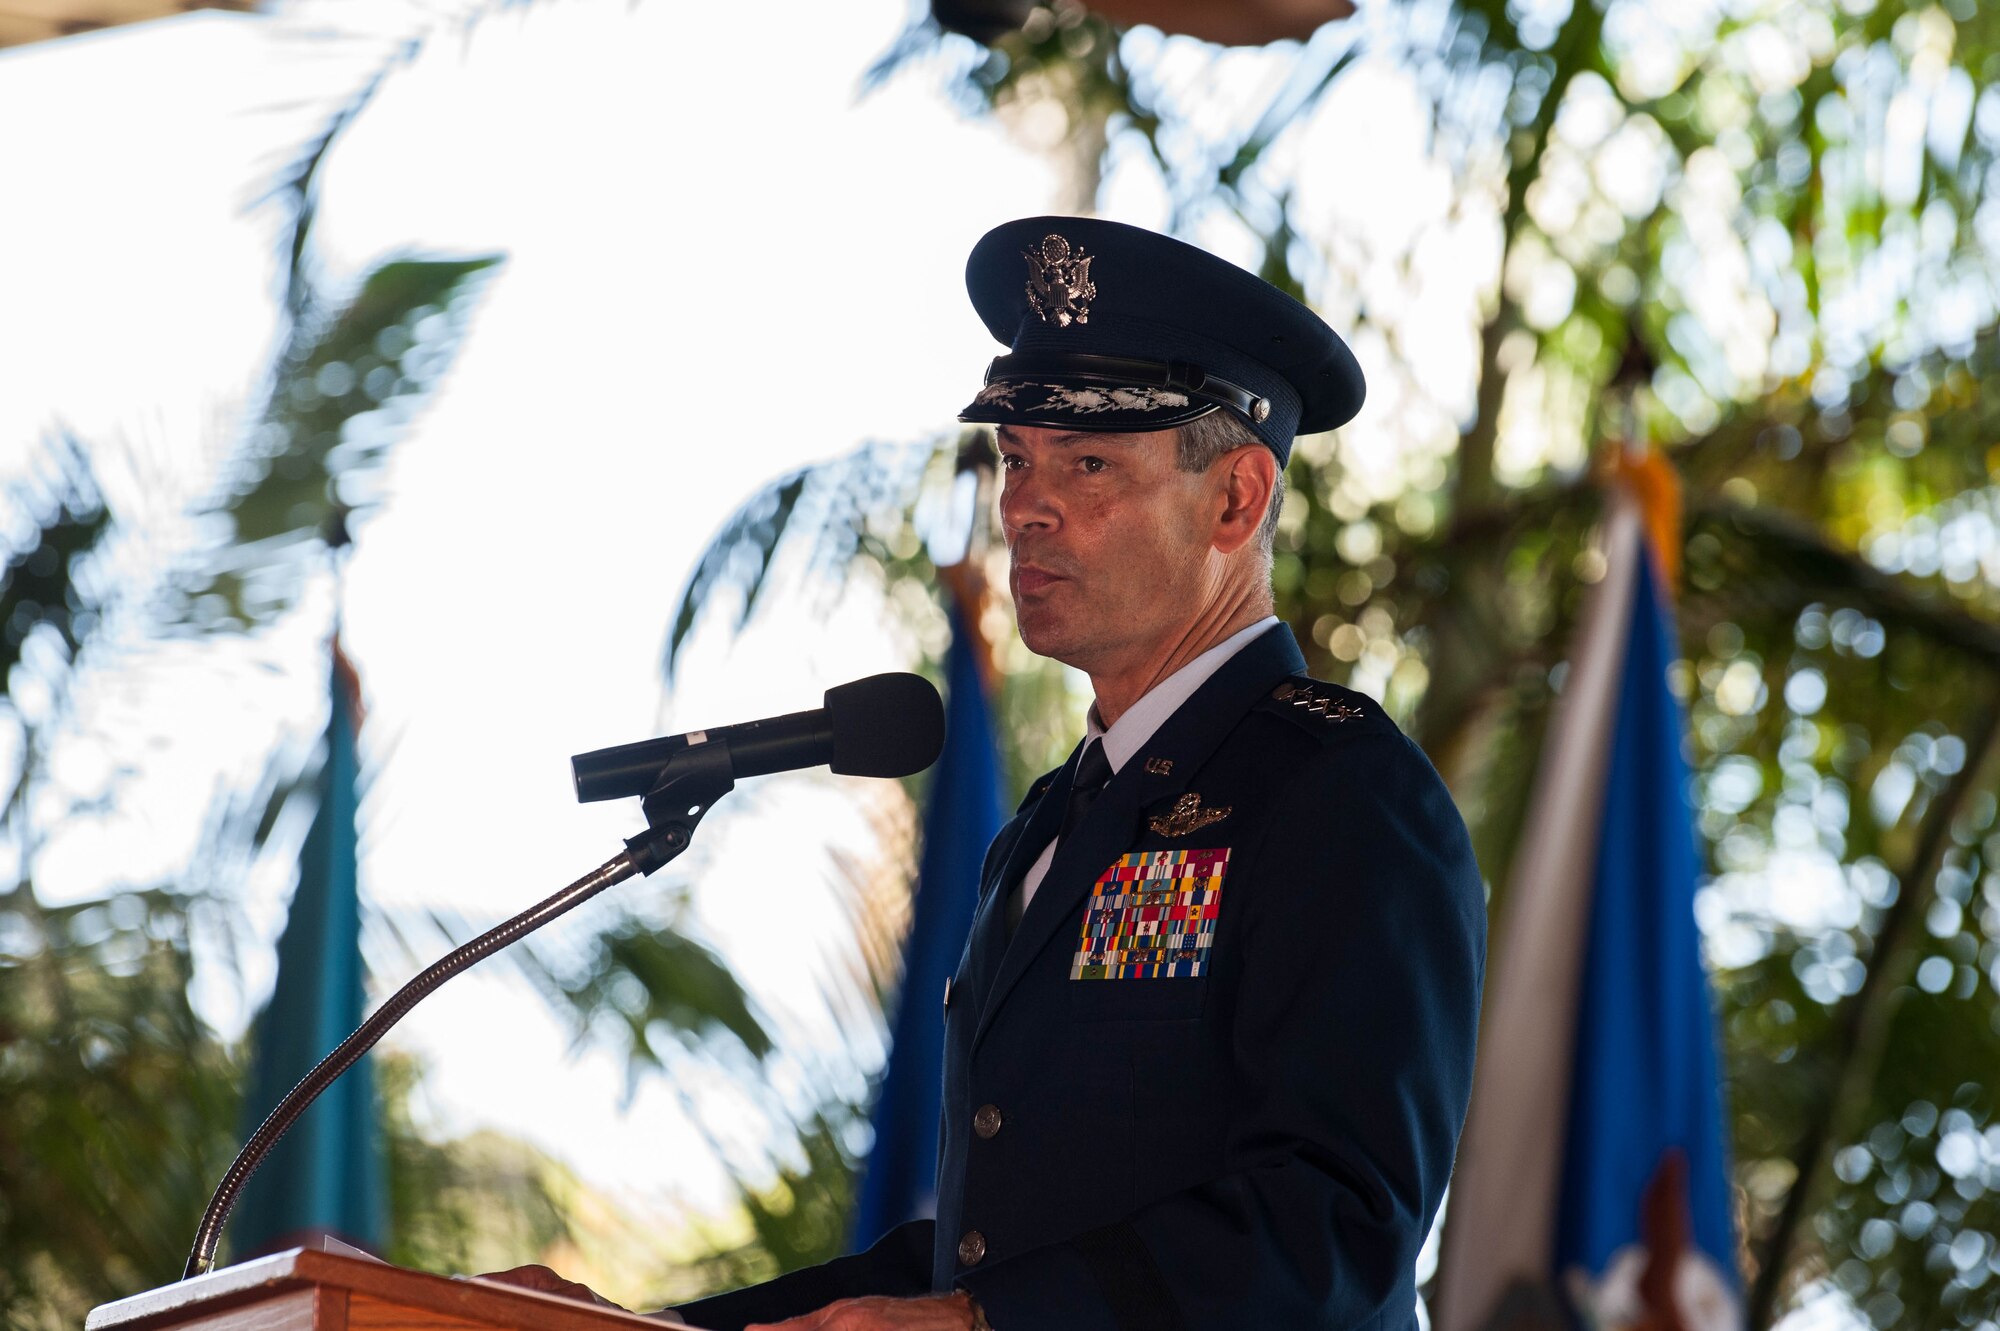 Gen. Kenneth S. Wilsbach, Pacific Air Forces commander, gives remarks during a Change of Command Ceremony on Joint Base Pearl Harbor-Hickam, Hawaii, July 8, 2020. Wilsbach assumed command of PACAF from Gen. CQ Brown, Jr. during the ceremony. Prior to taking the command at PACAF, Wilsbach served as the Commander, 7th Air Force and Deputy Commander, U.S. Forces Korea. Other assignments included, Alaskan Region, North American Aerospace Defense Command, Commander, Alaskan Command, U.S. Northern Command and Commander, 11th Air Force. (U.S. Air Force photo by Staff Sgt. Hailey Haux)